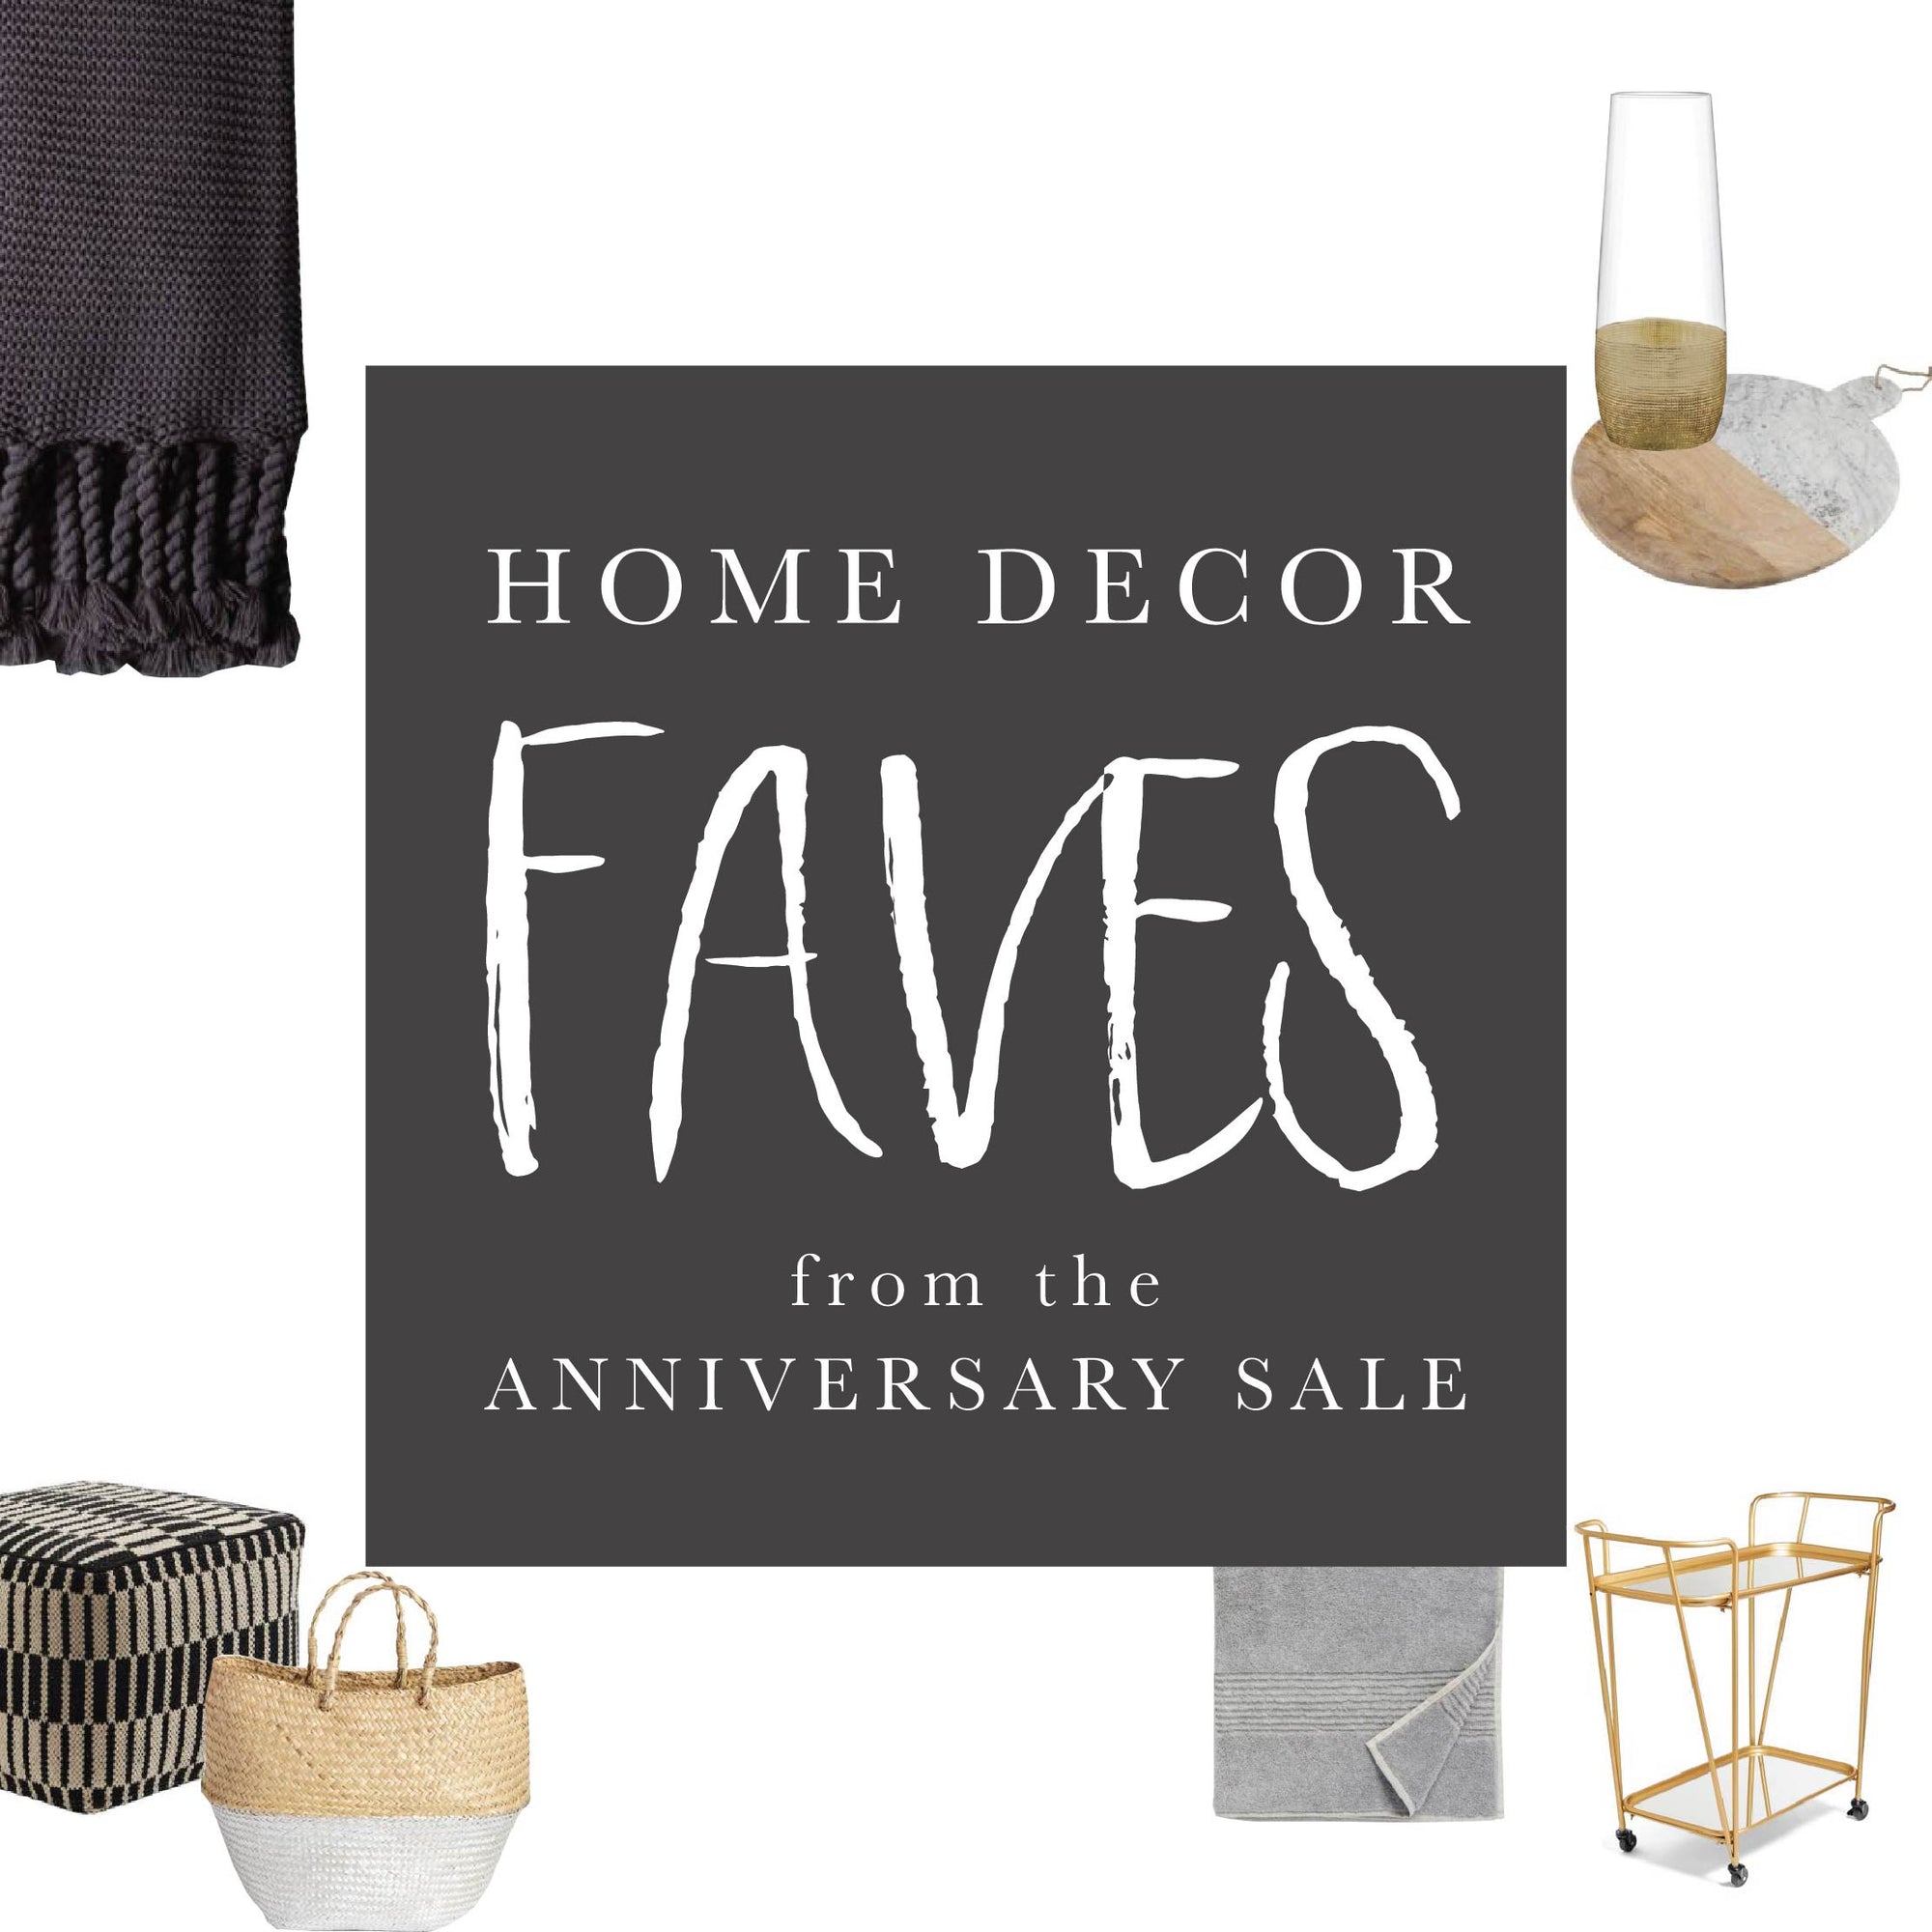 Home Decor FAVES from the Nordstrom Anniversary Sale!